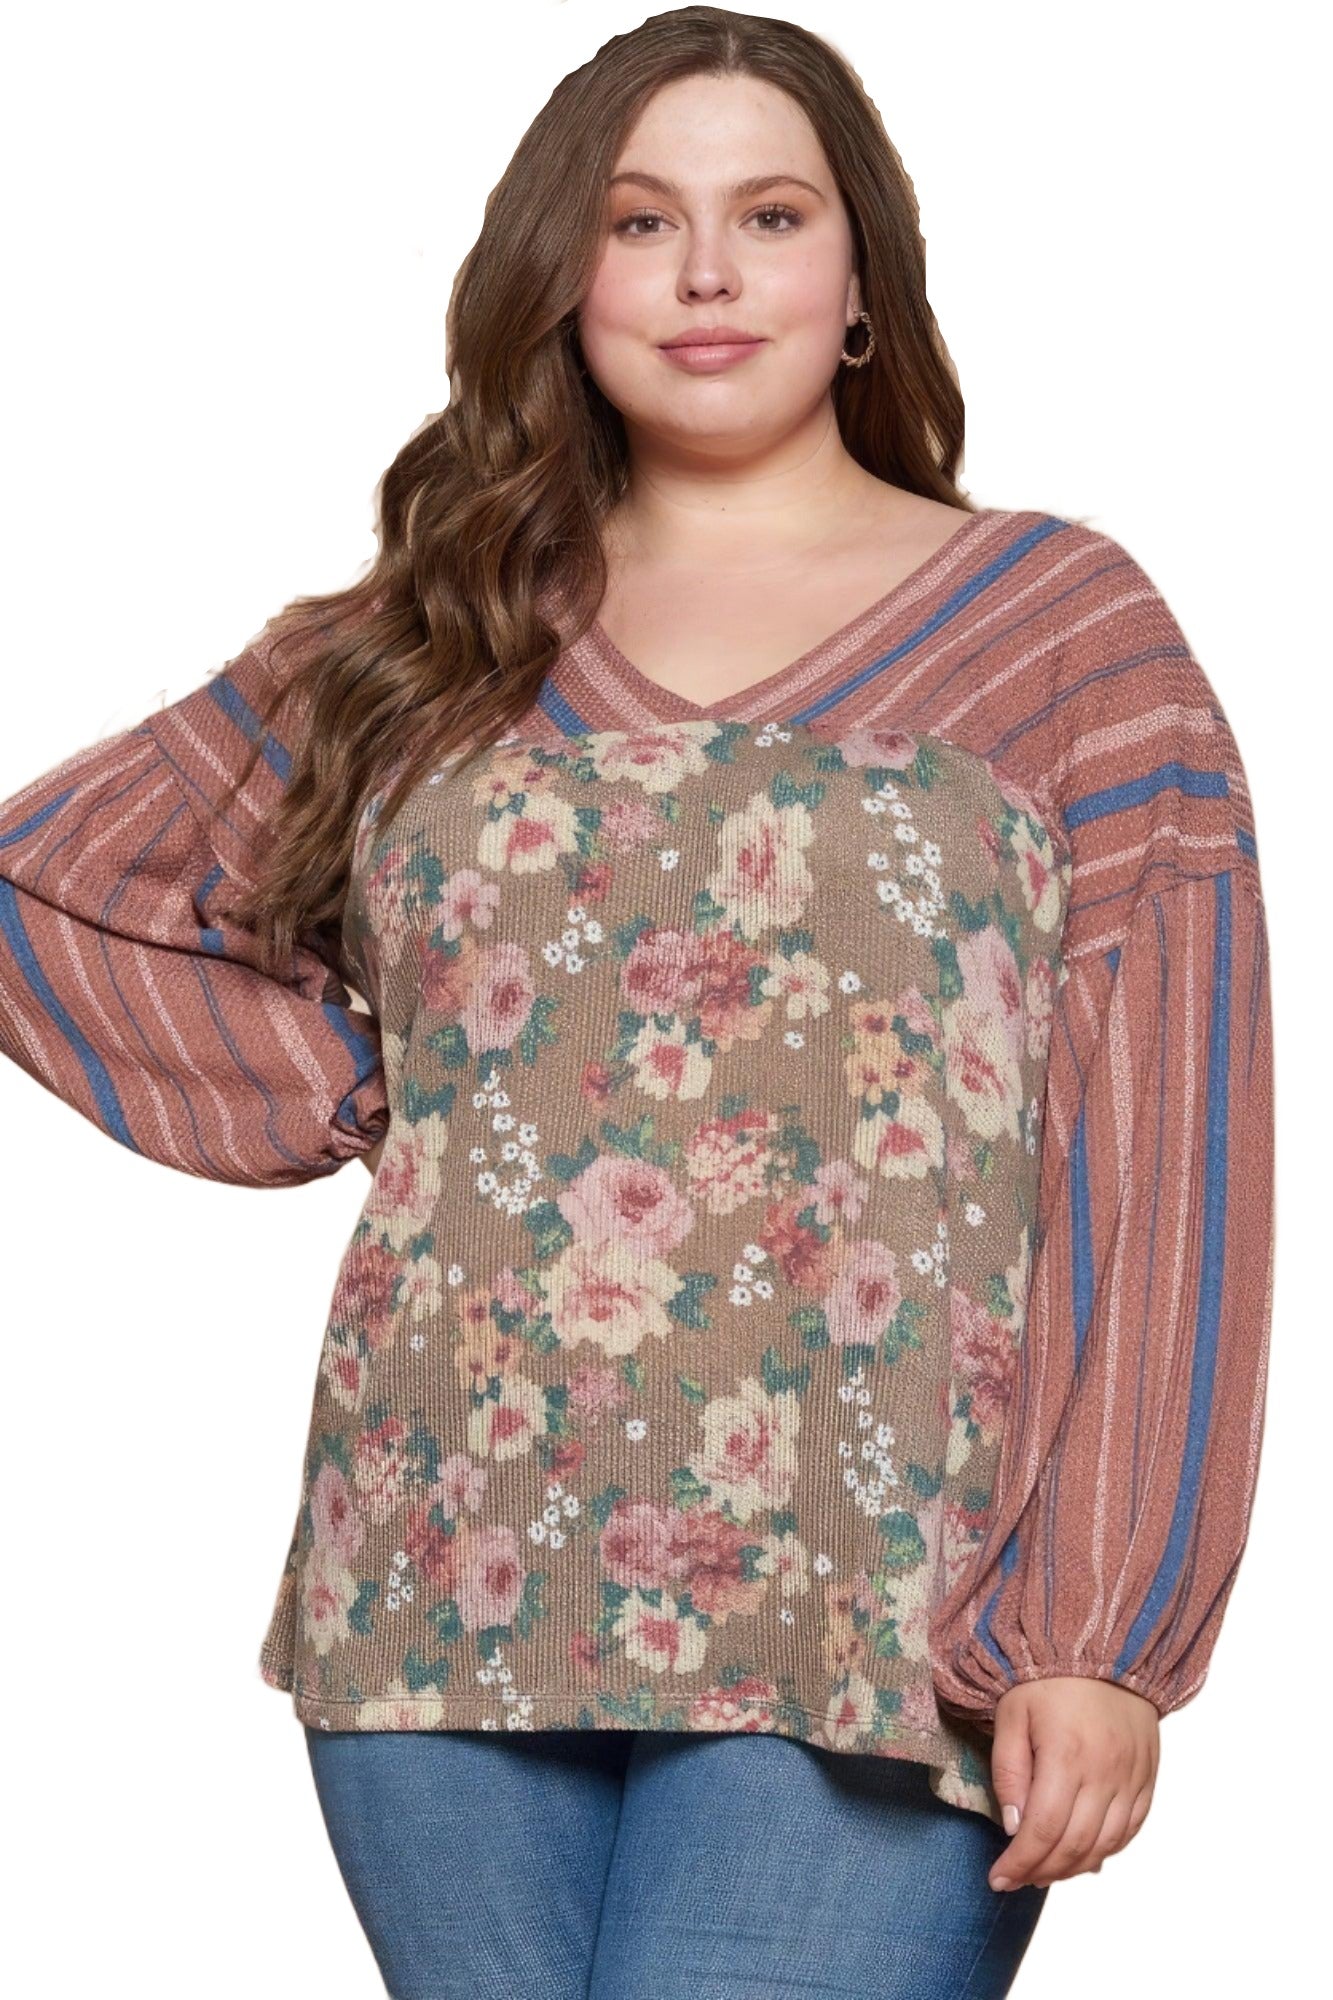 Women's Shirts Floral Printed Knit Top